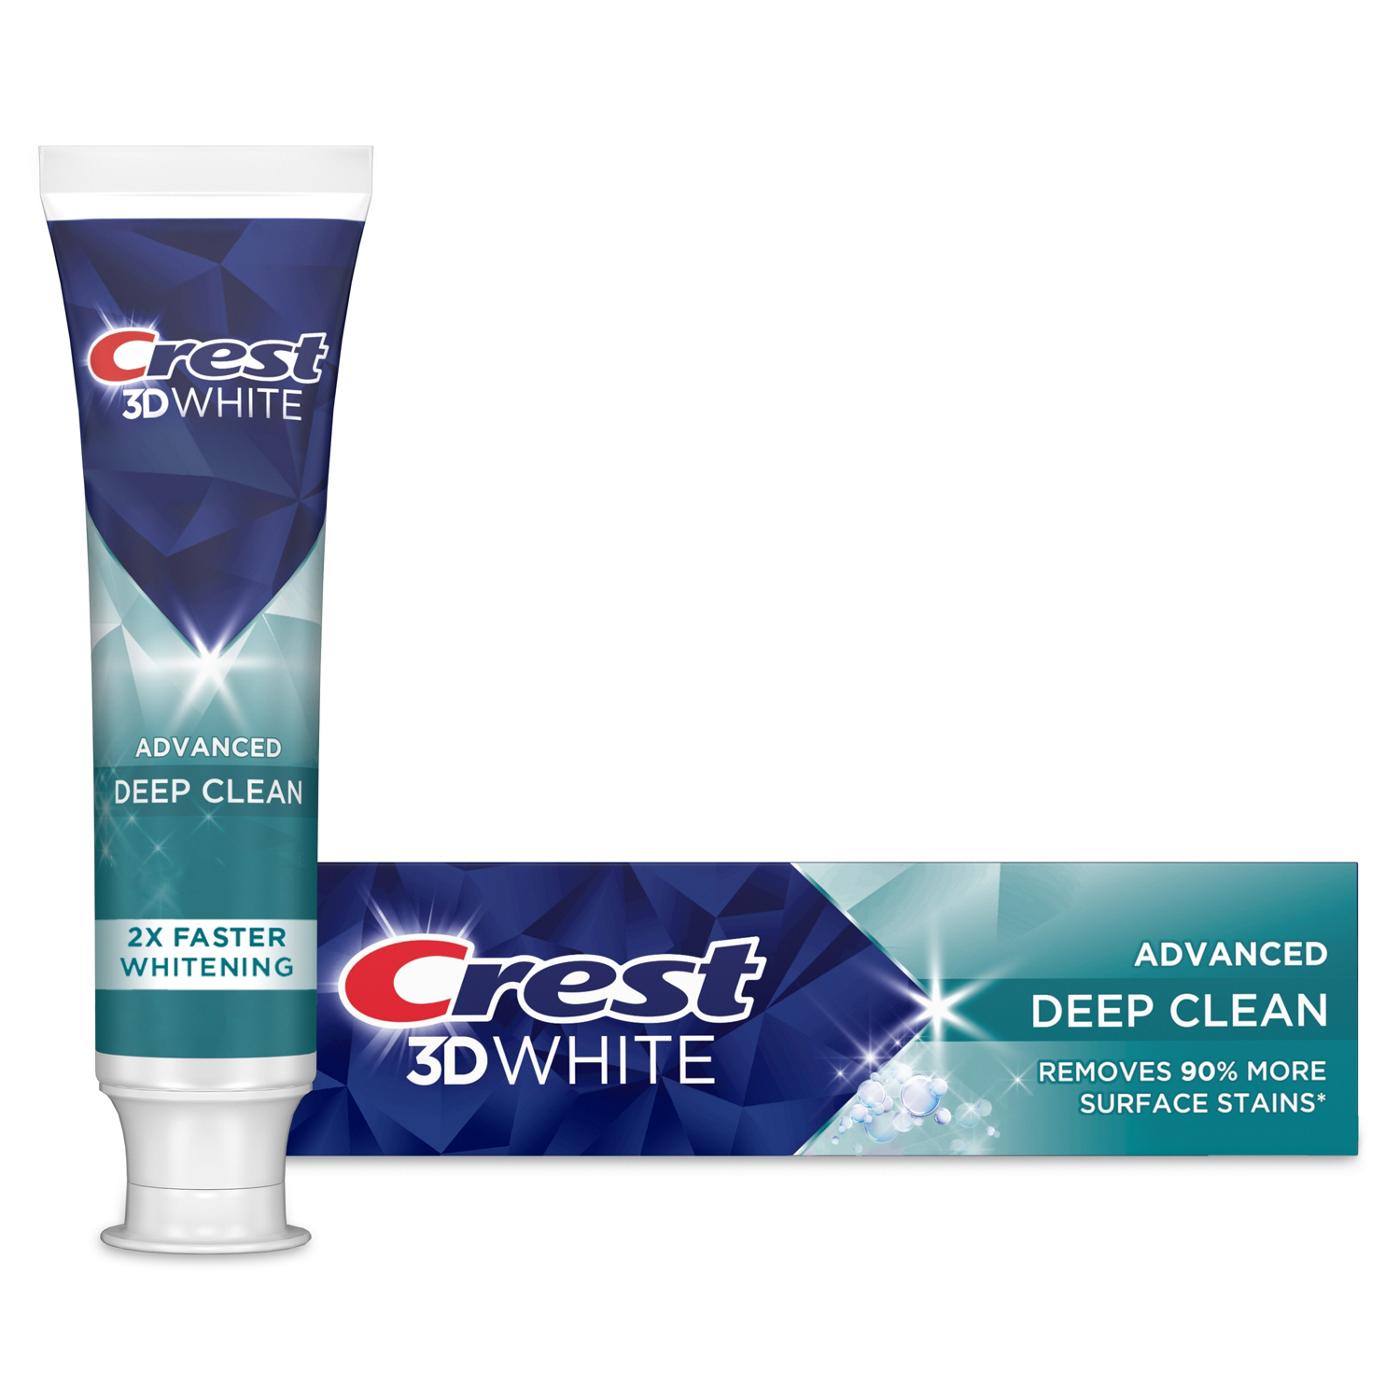 Crest 3D White Whitening Toothpaste - Deep Clean; image 6 of 7